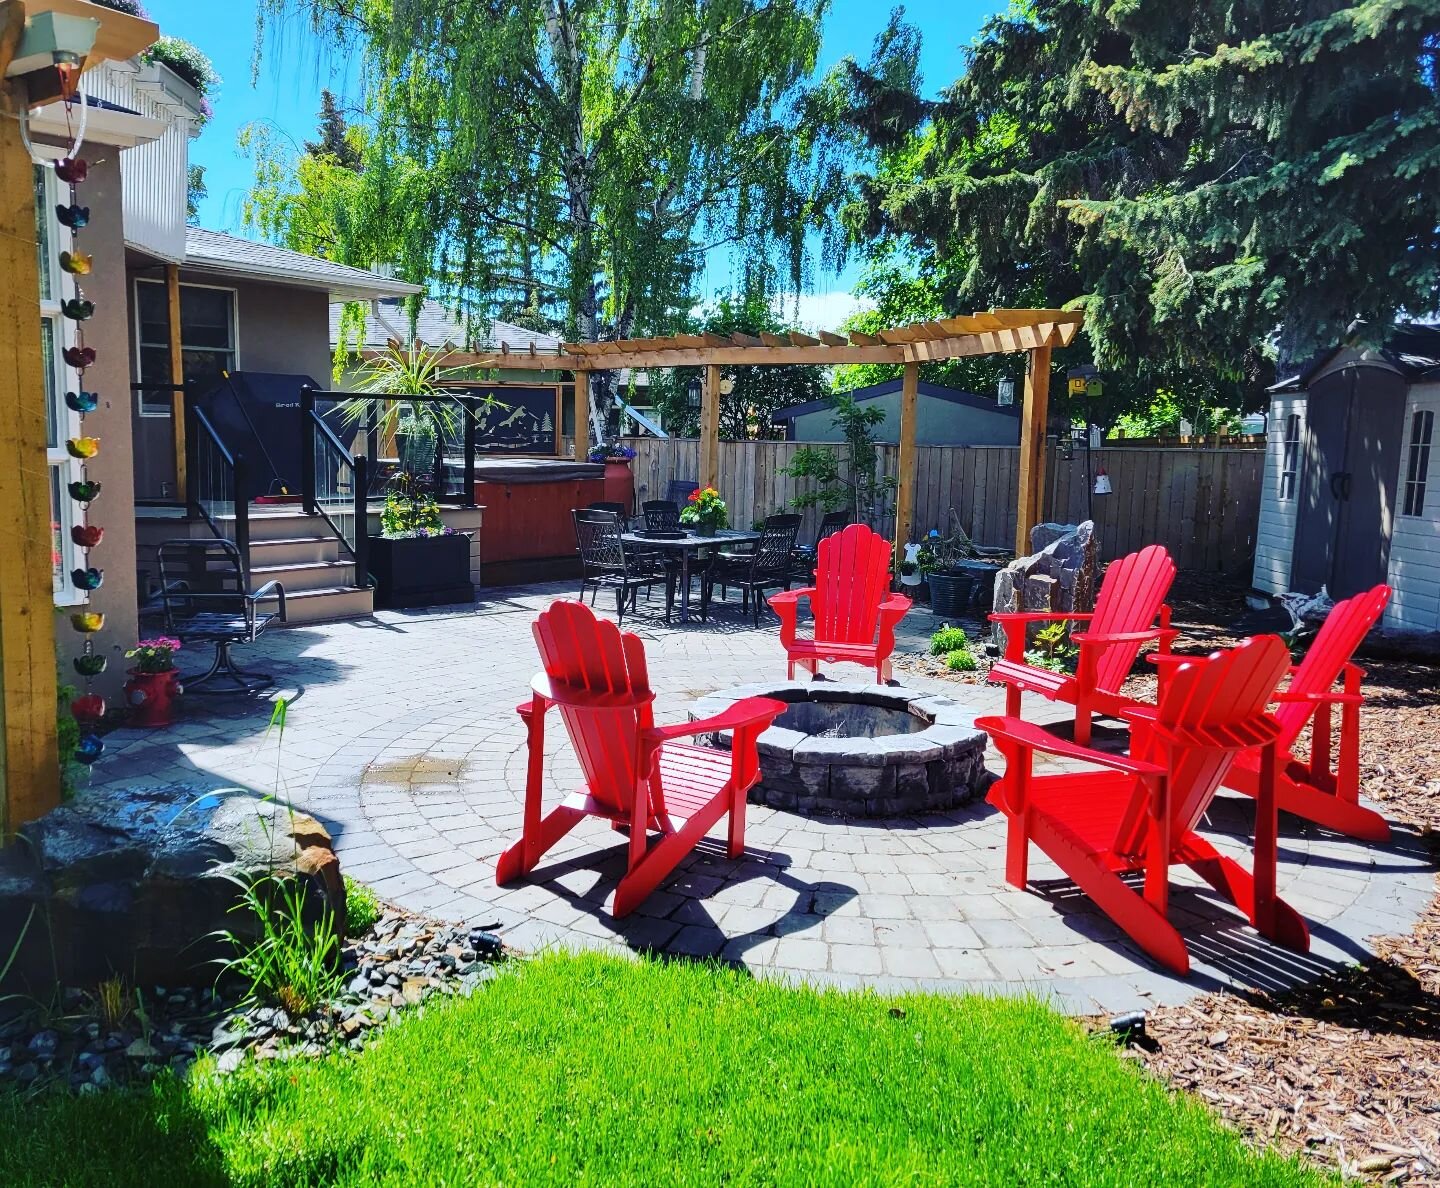 Despite the cold weather spring is right around the corner and we are booking up fast!

Call or text us today for a free estimate and secure your spot this 2023 season!

4034717588

#calgarydreamscapes #landscaping #calgary #construction #spring #yyc